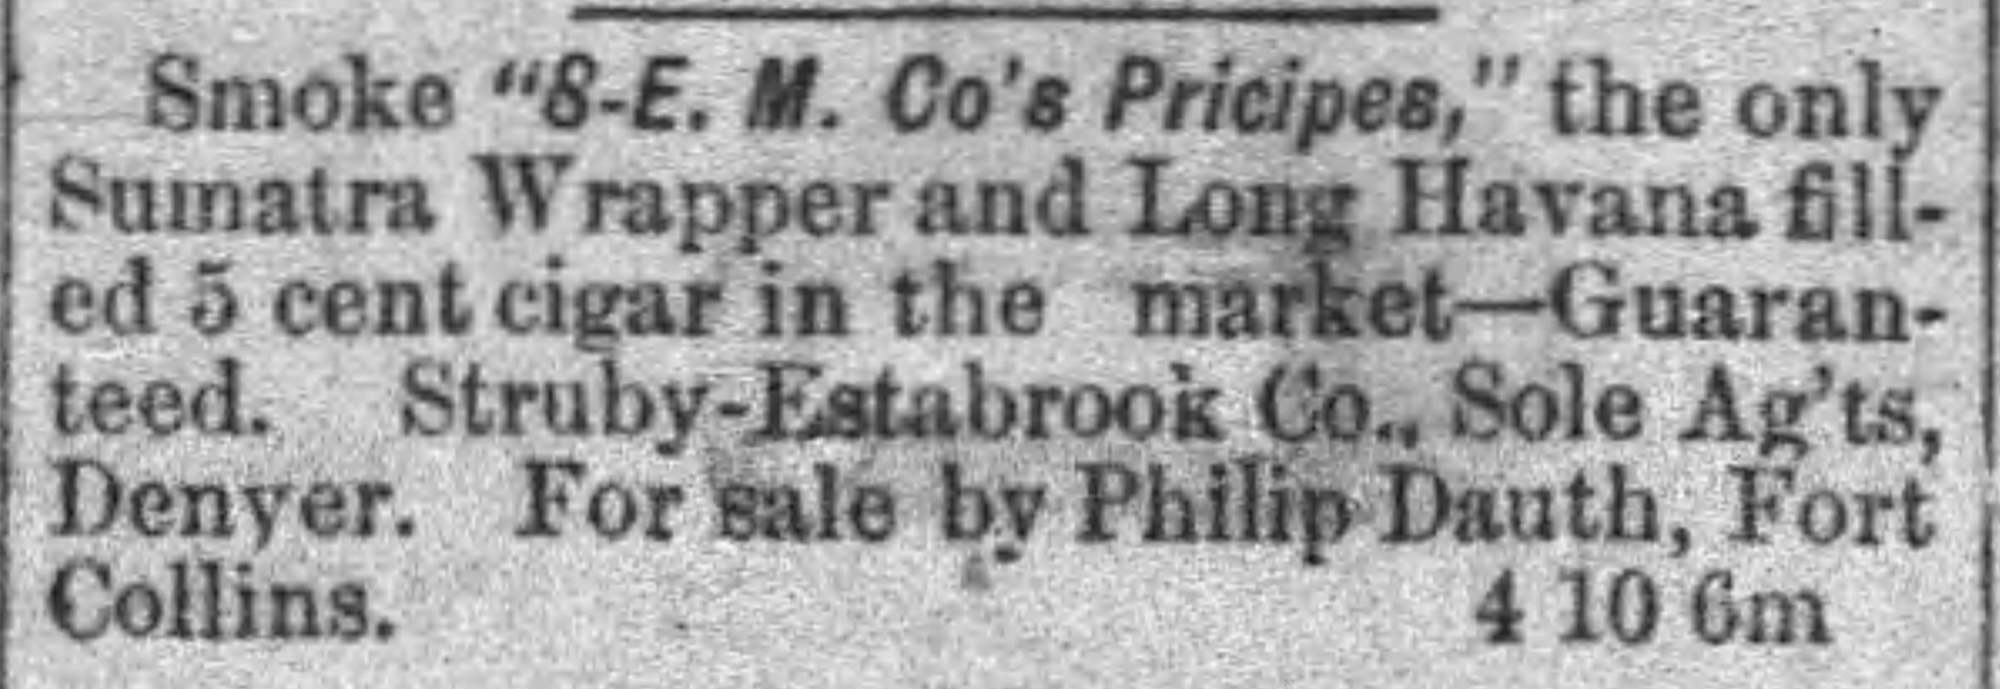 Dauth Family Archive - 1886-07-17 - The Fort Collins Express - Philip Dauth Cigar Advertisement